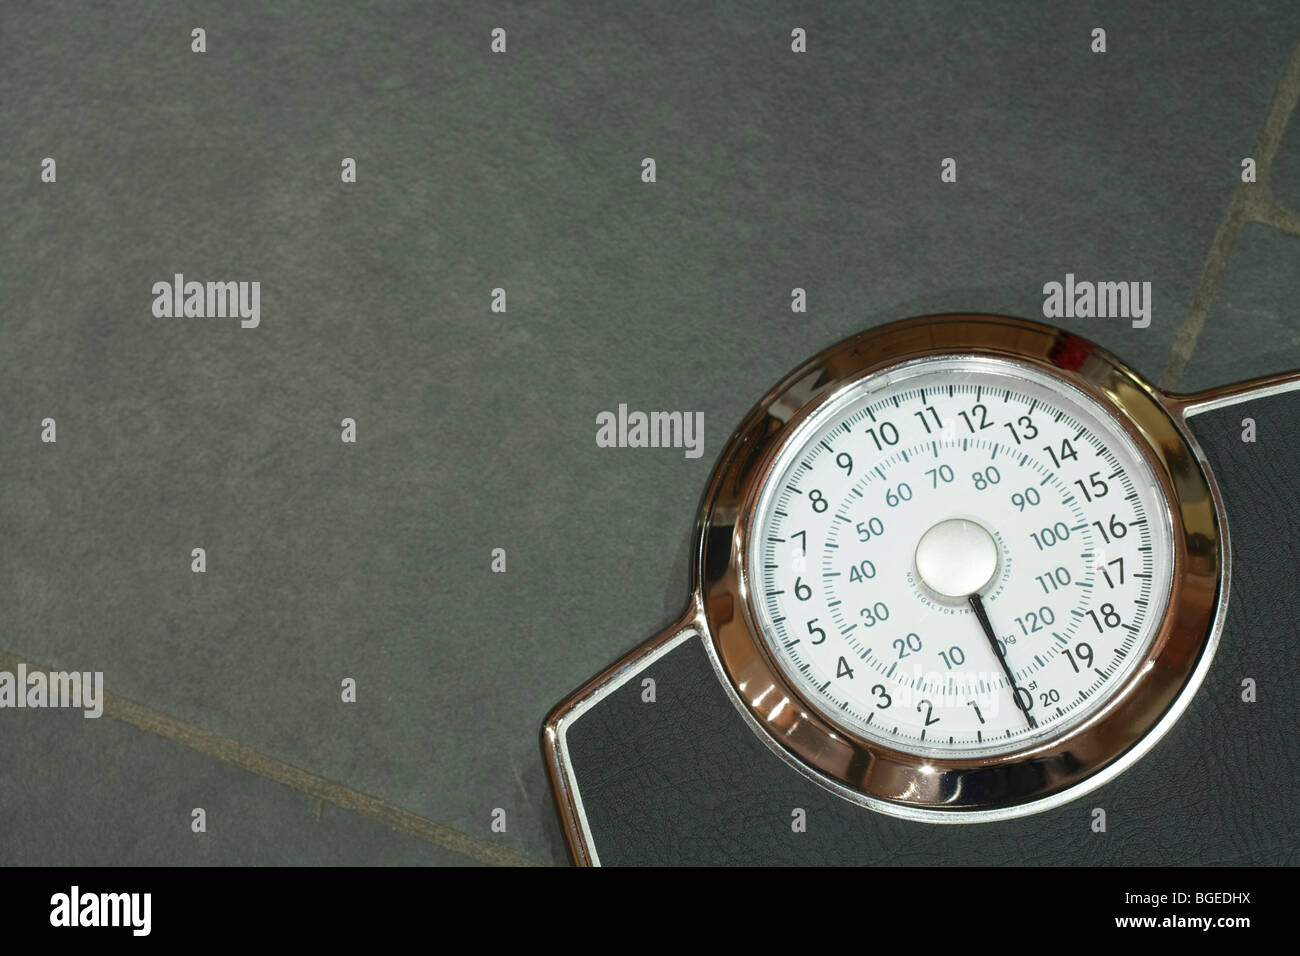 Bathroom scales on a slate floor with copyspace Stock Photo